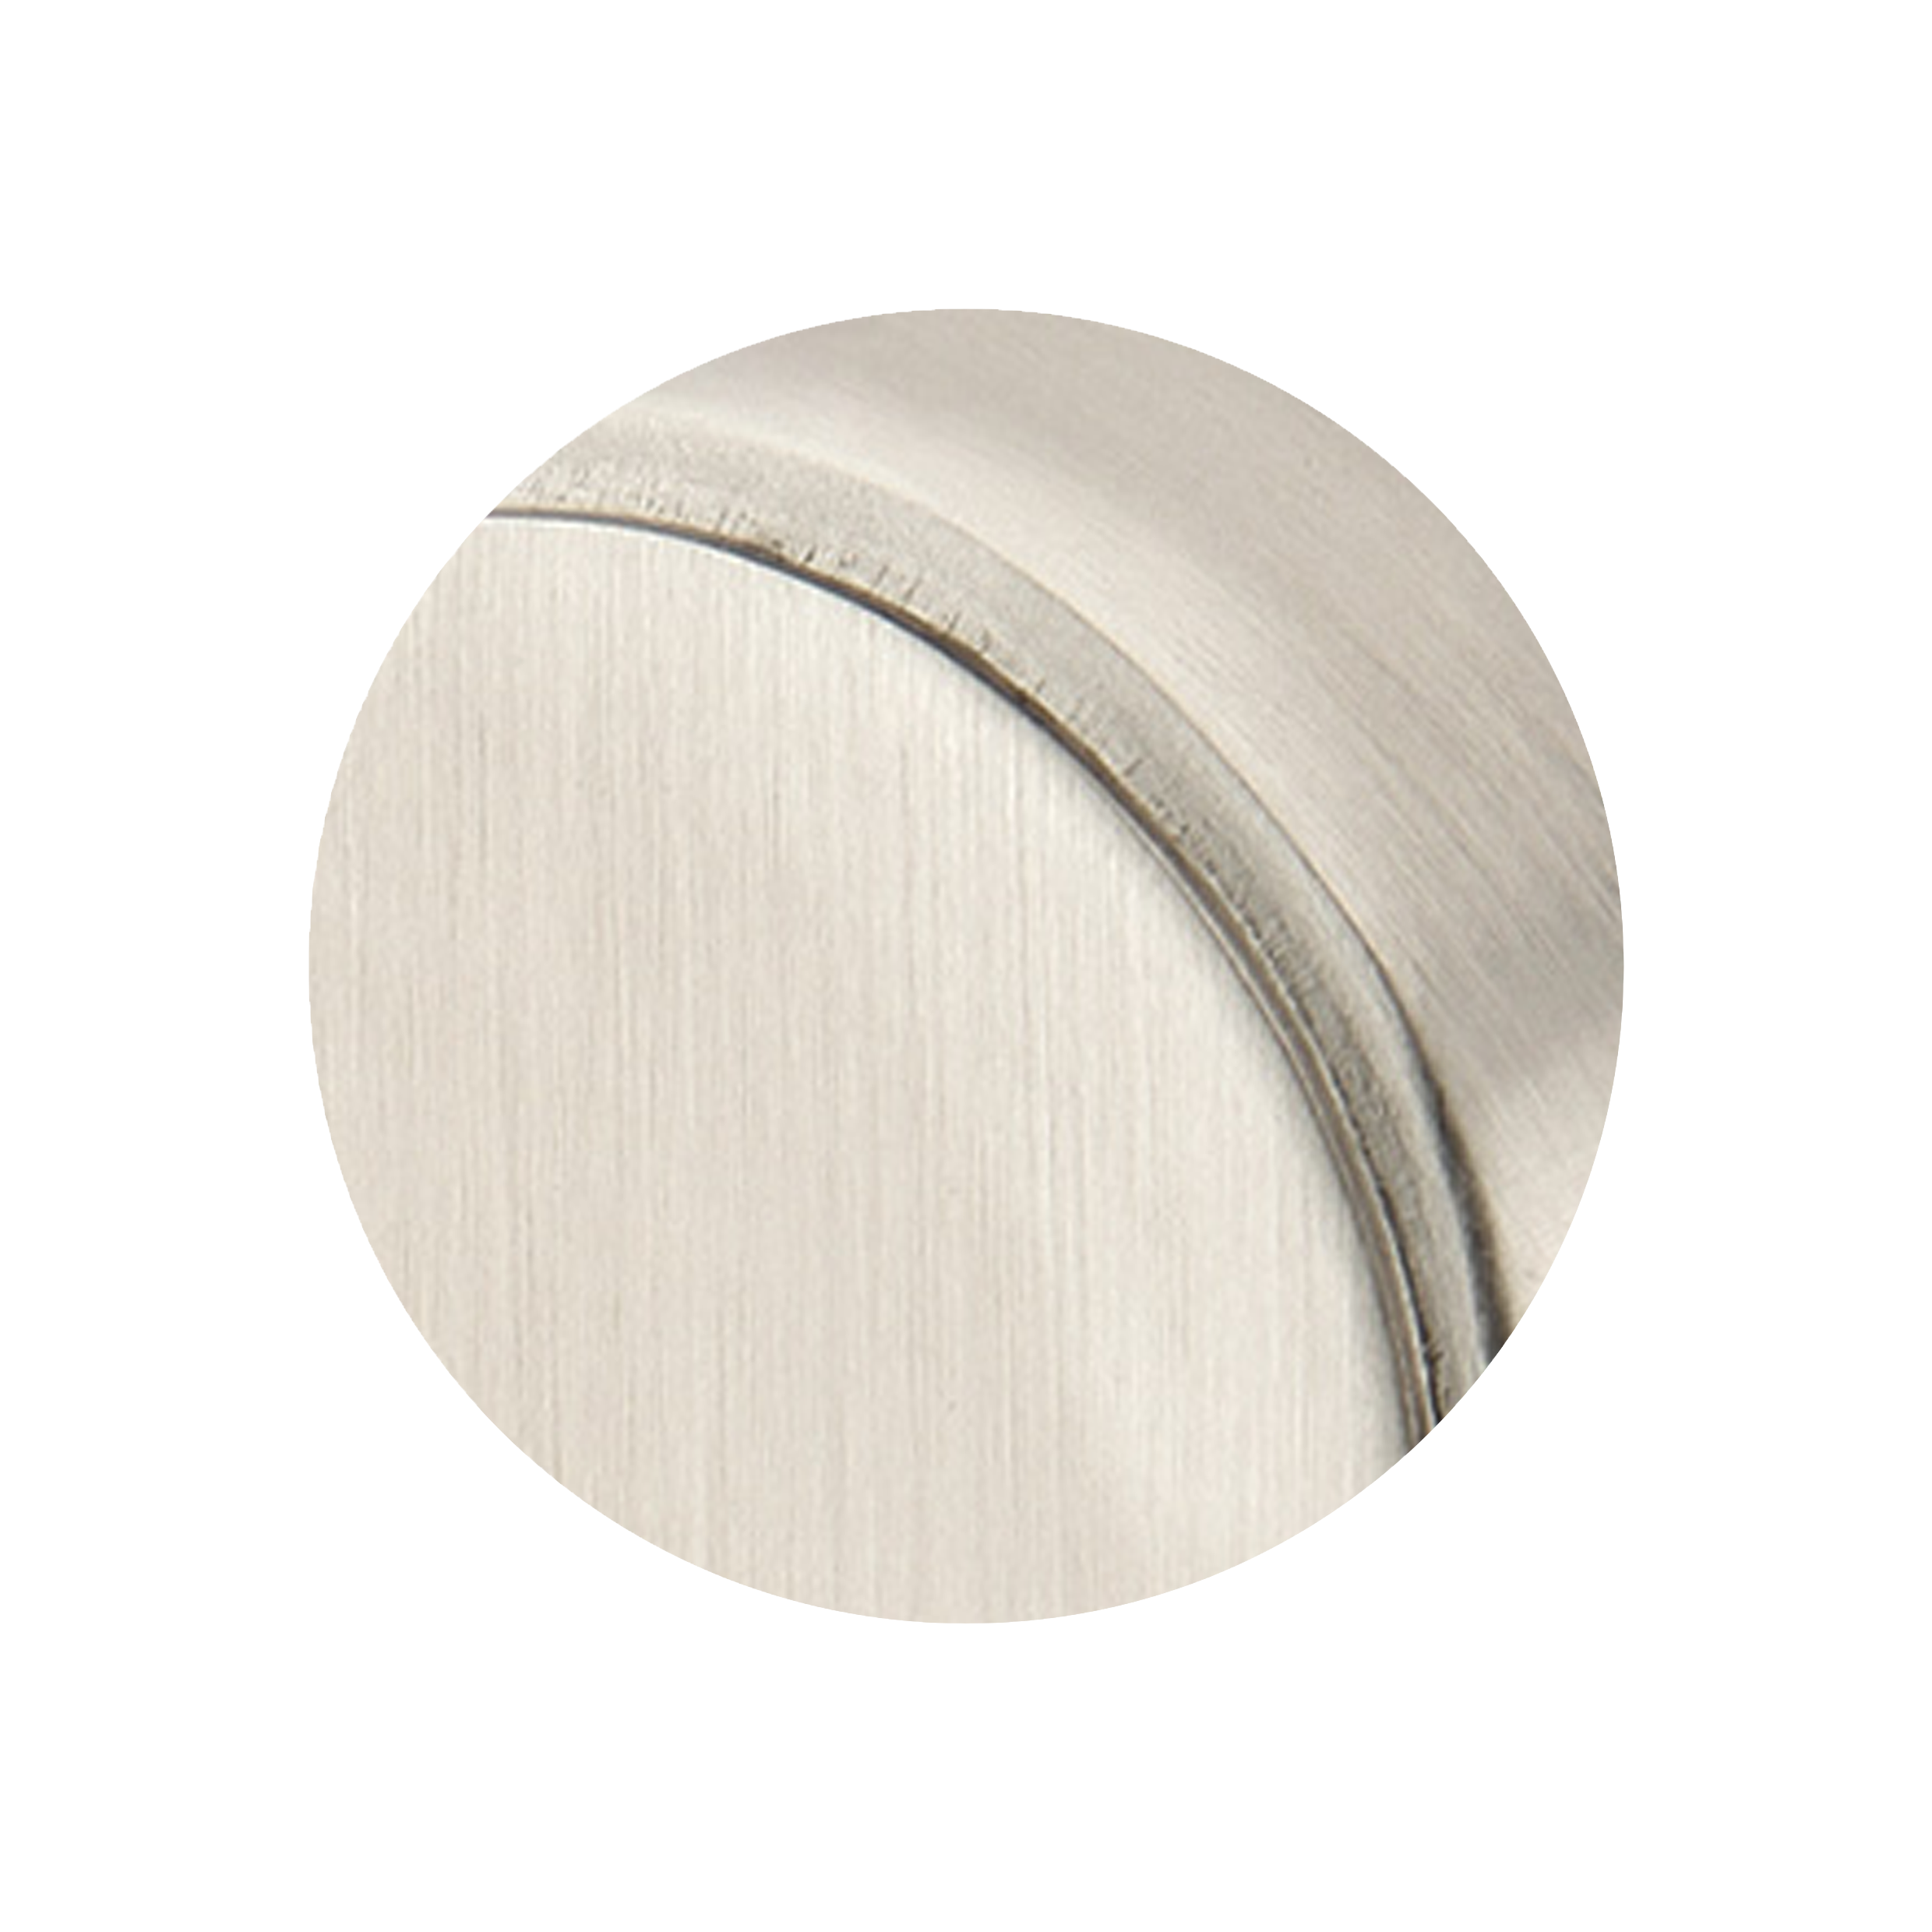 Satin Nickel Finish Collection Link